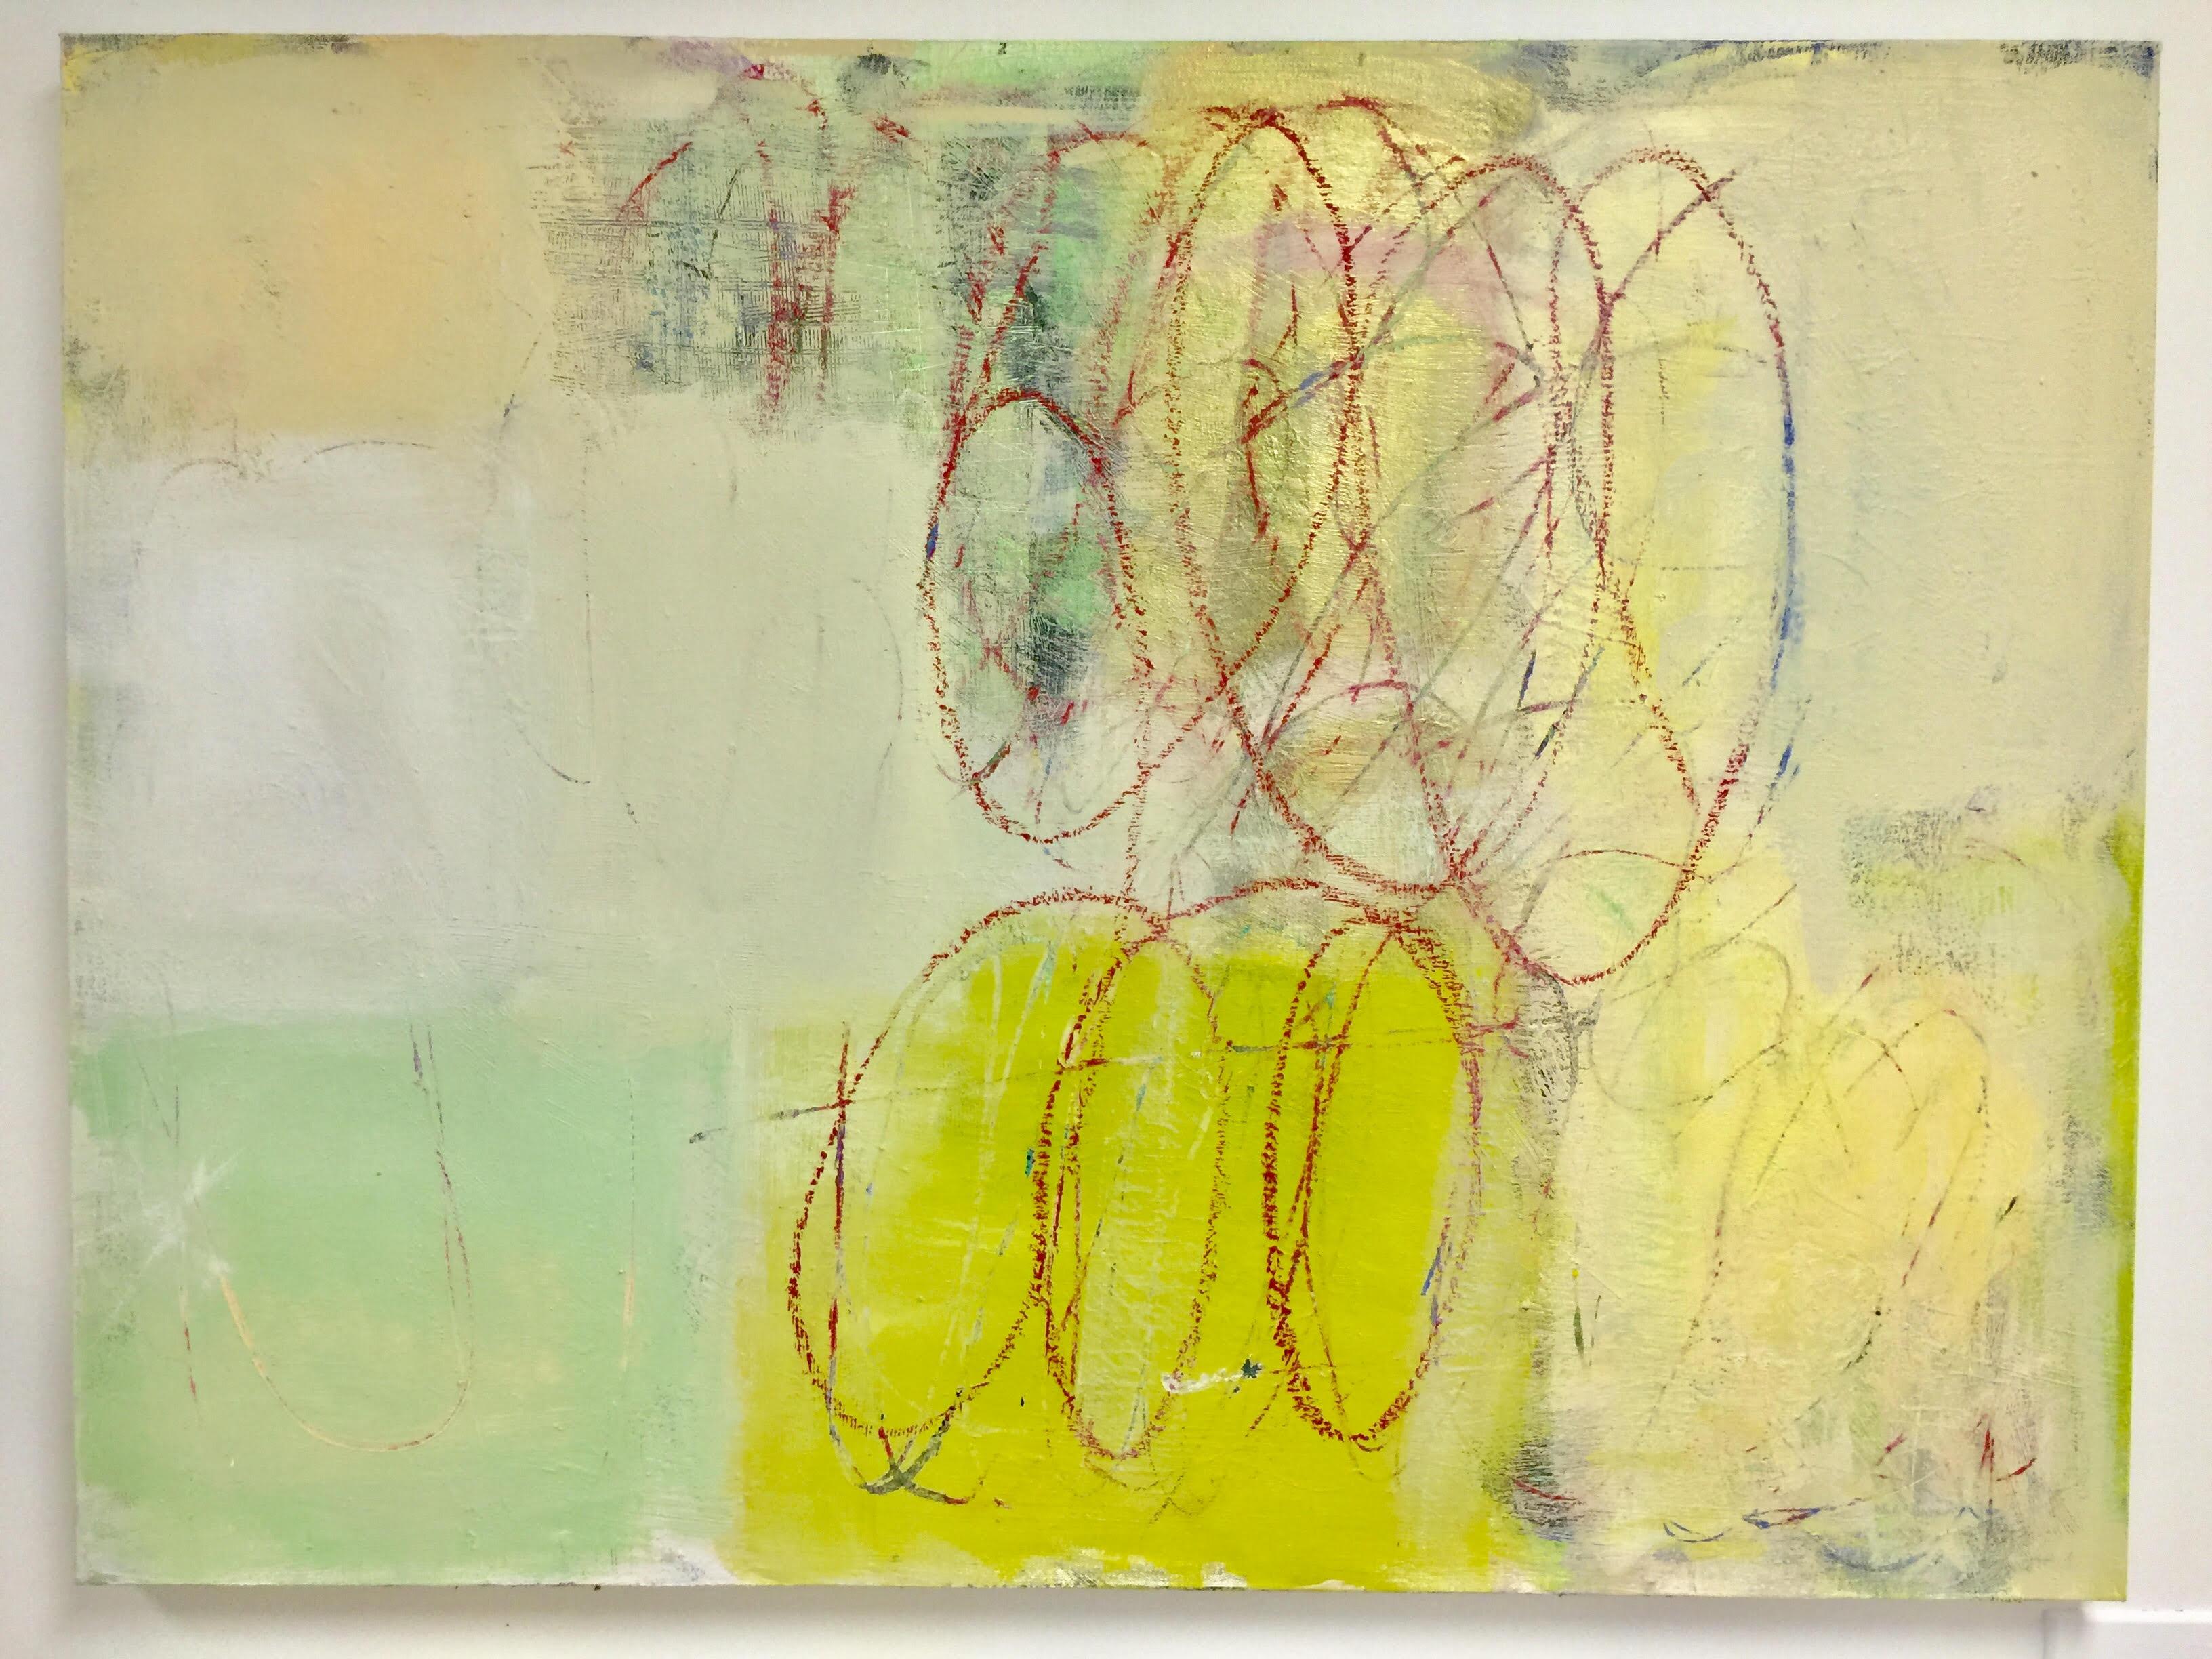 Ellen Hermanos Abstract Painting - Jade Variations, bright green and yellow abstract painting on canvas